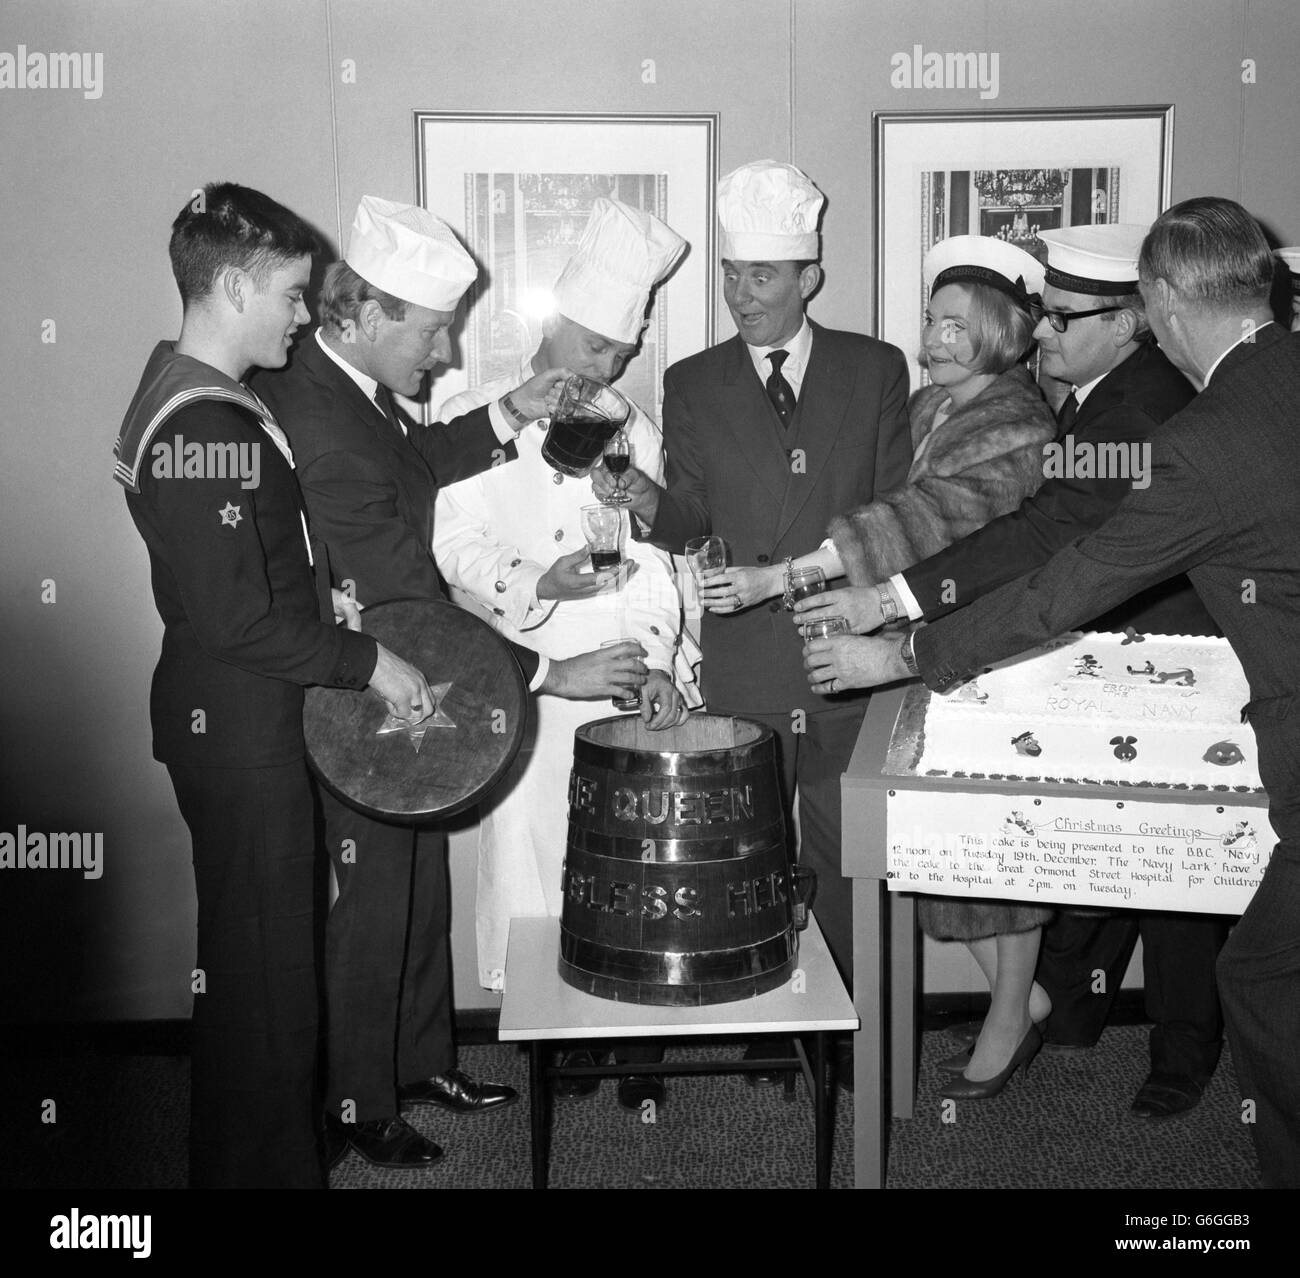 Stars of the BBC's Navy Lark visit the Royal Navy Catering Display at State House, High Holborn, London. They received a large celebration cake to present to the Great Ormond Street Children's Hospital. (l-r) Steward Lionel Parry, Leslie Phillips, CPO Cook Alfred Fielding, Michael Bates, Heather Chasen, Ronnie Barker, and producer Alistair Scott Johnston. Stock Photo